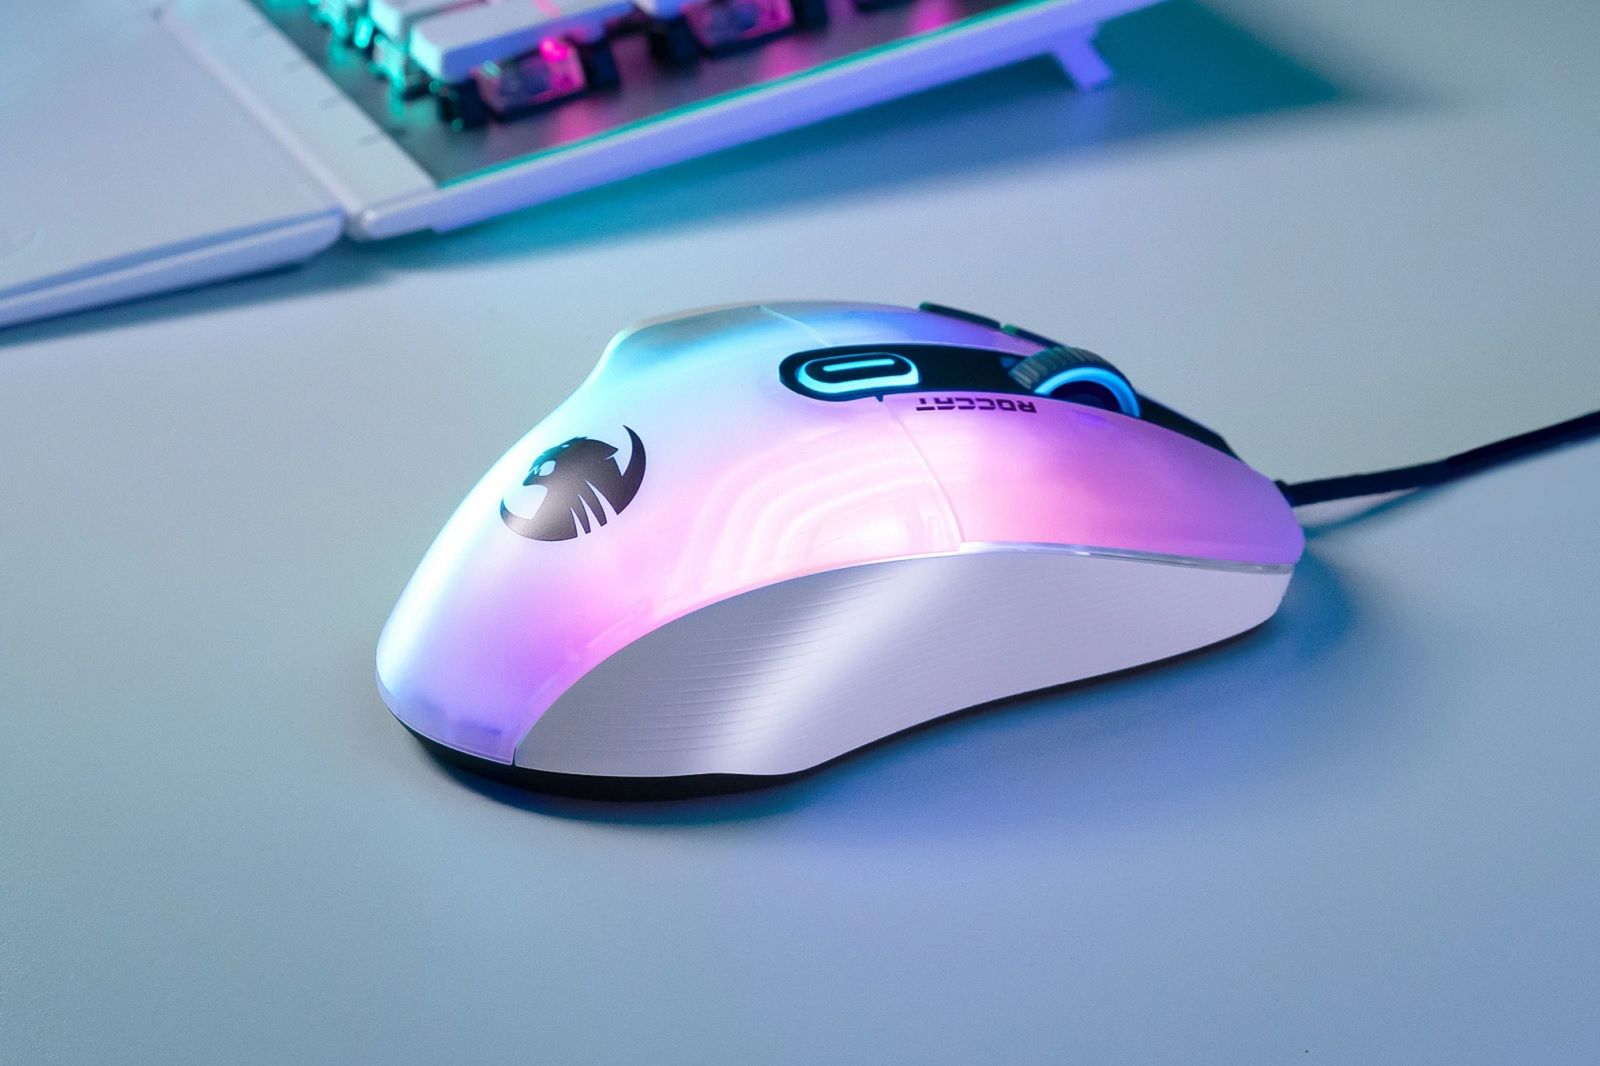 Roccat's Kone XP mouse has 3D RGB lighting, 15 buttons and much more besides photo 1